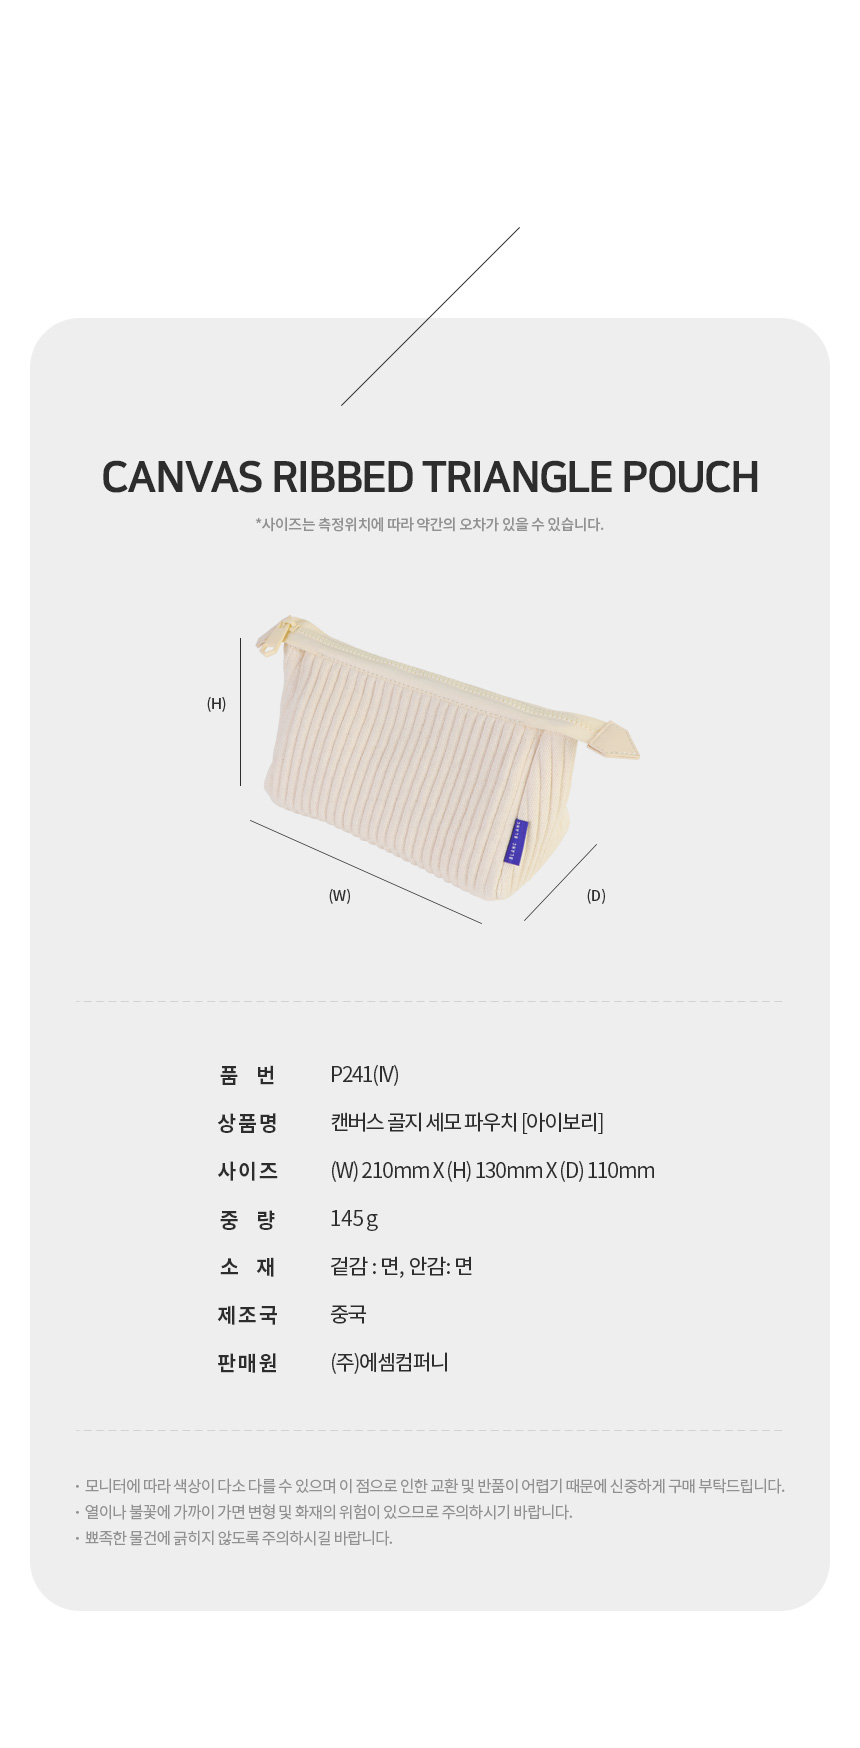 canvas_ribbed_triangle_pouch_03.jpg